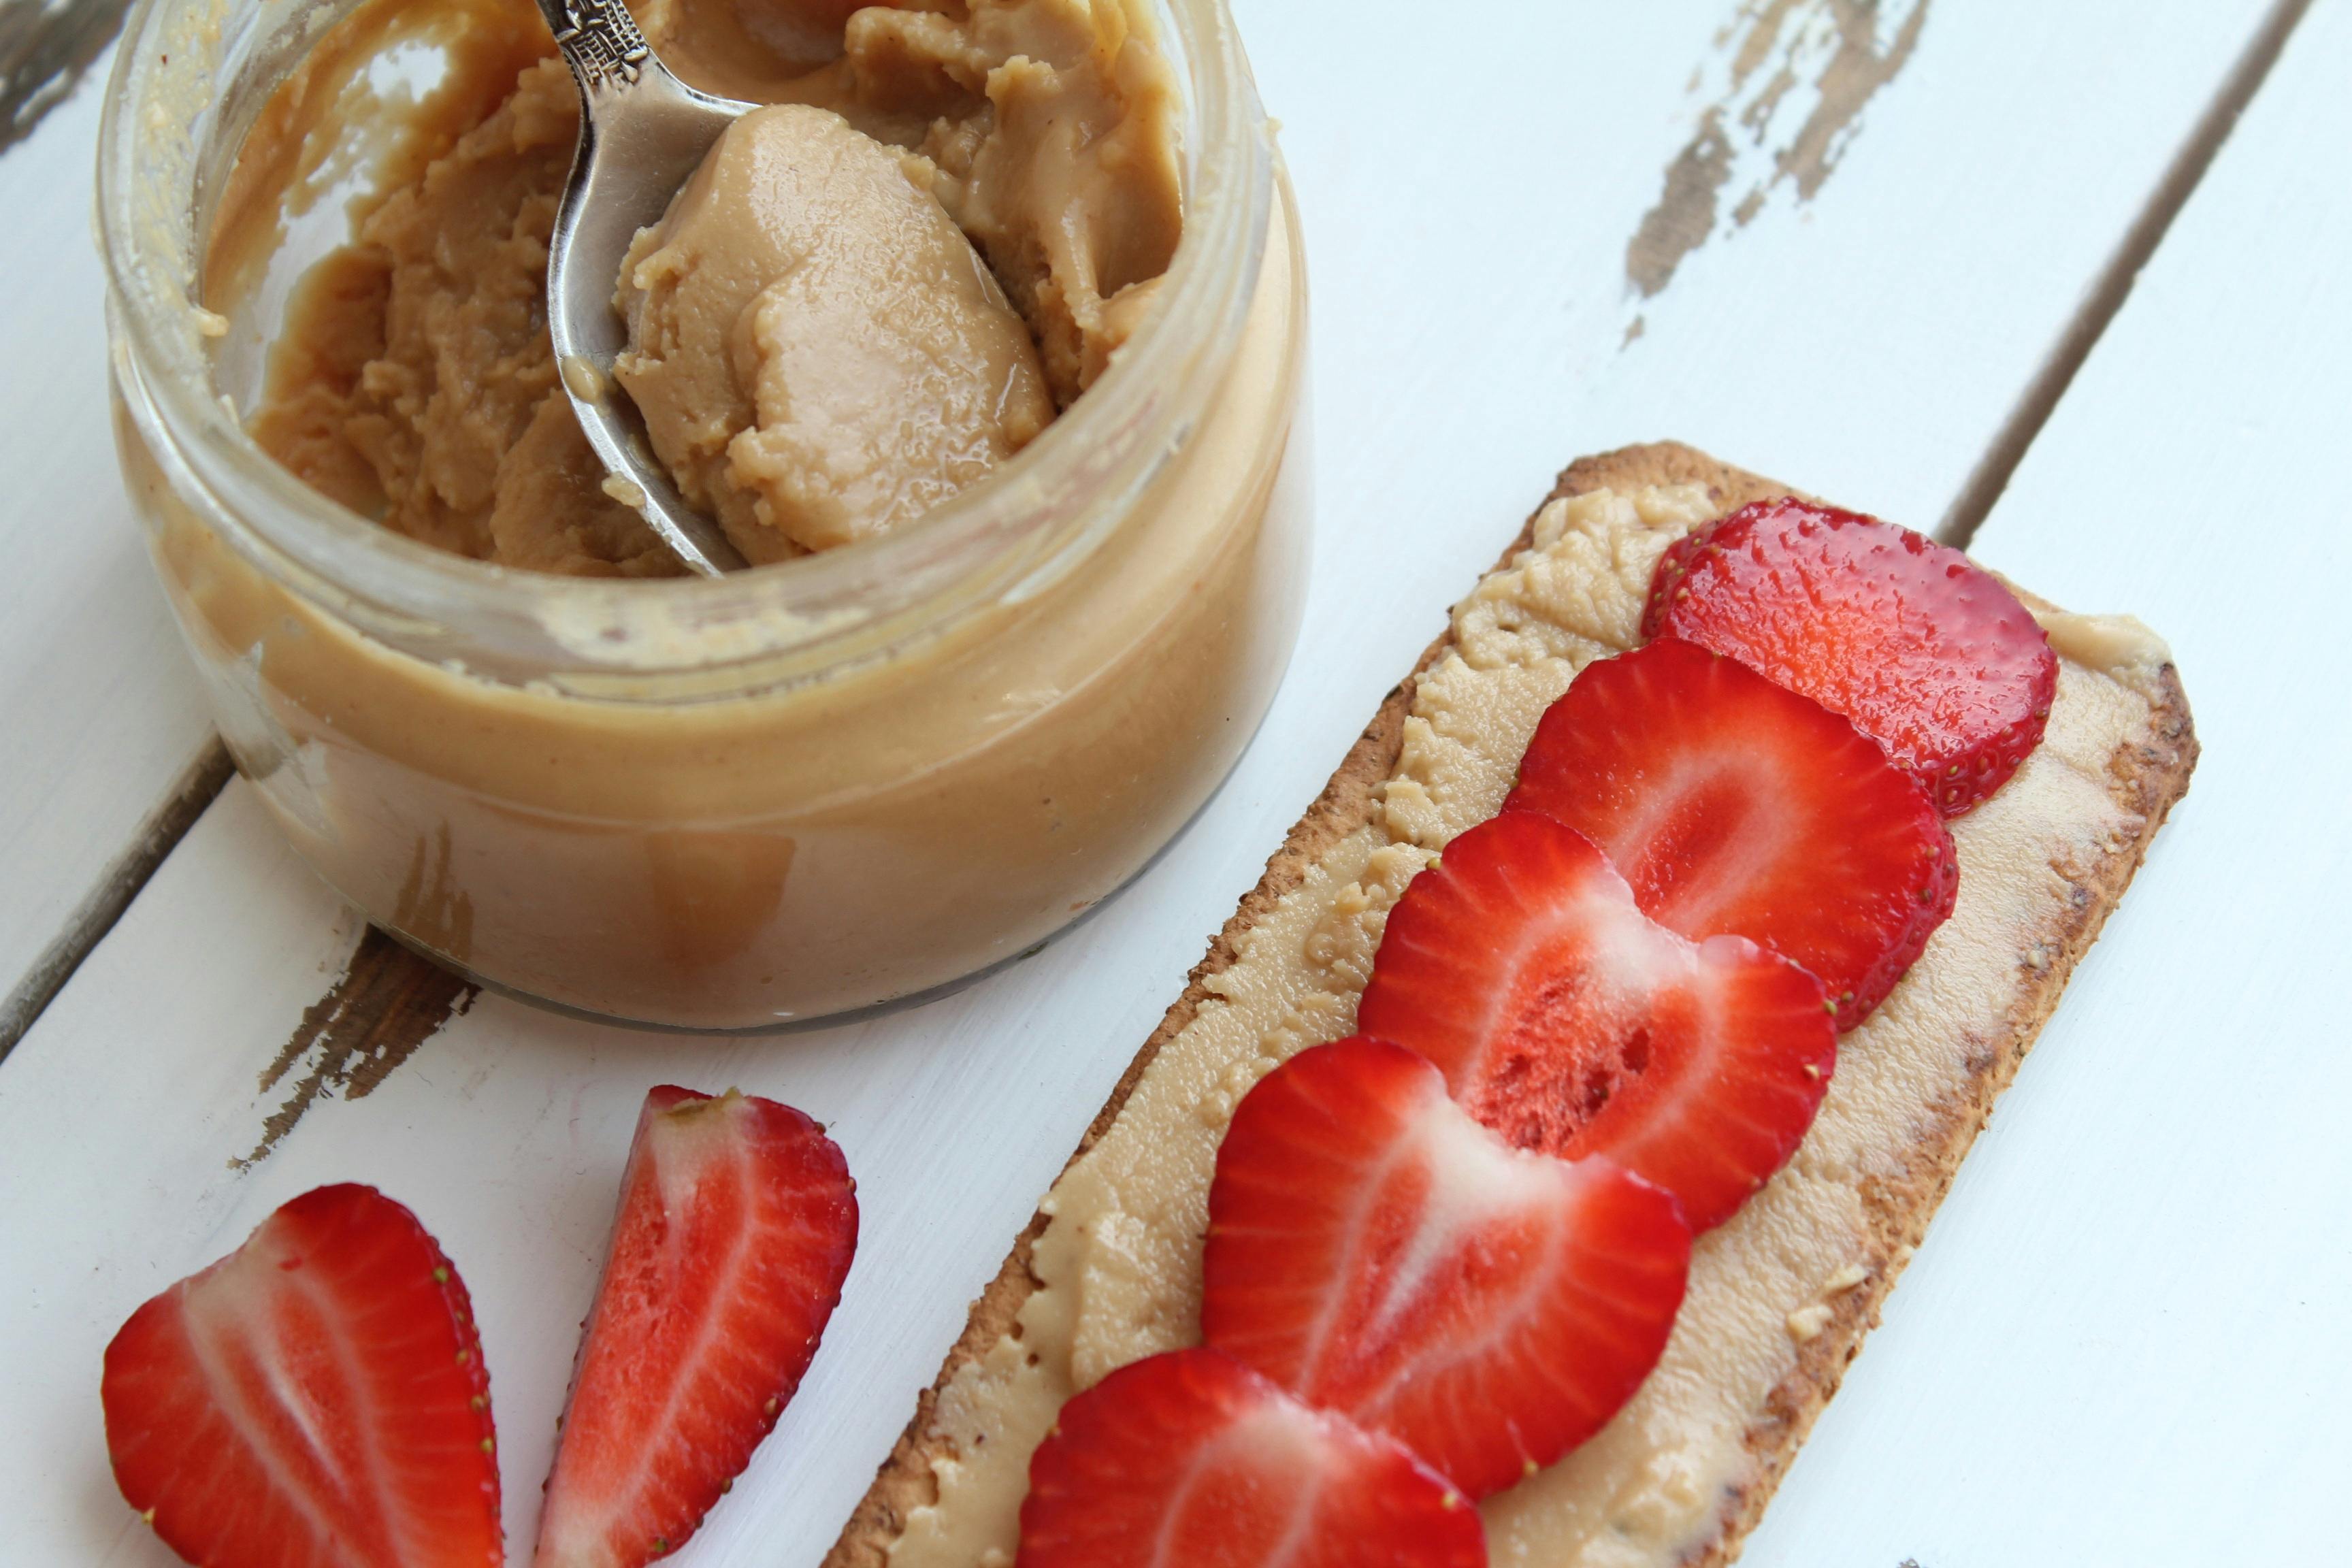 Peanut Butter Besides Sliced Strawberries on Baked Pastry